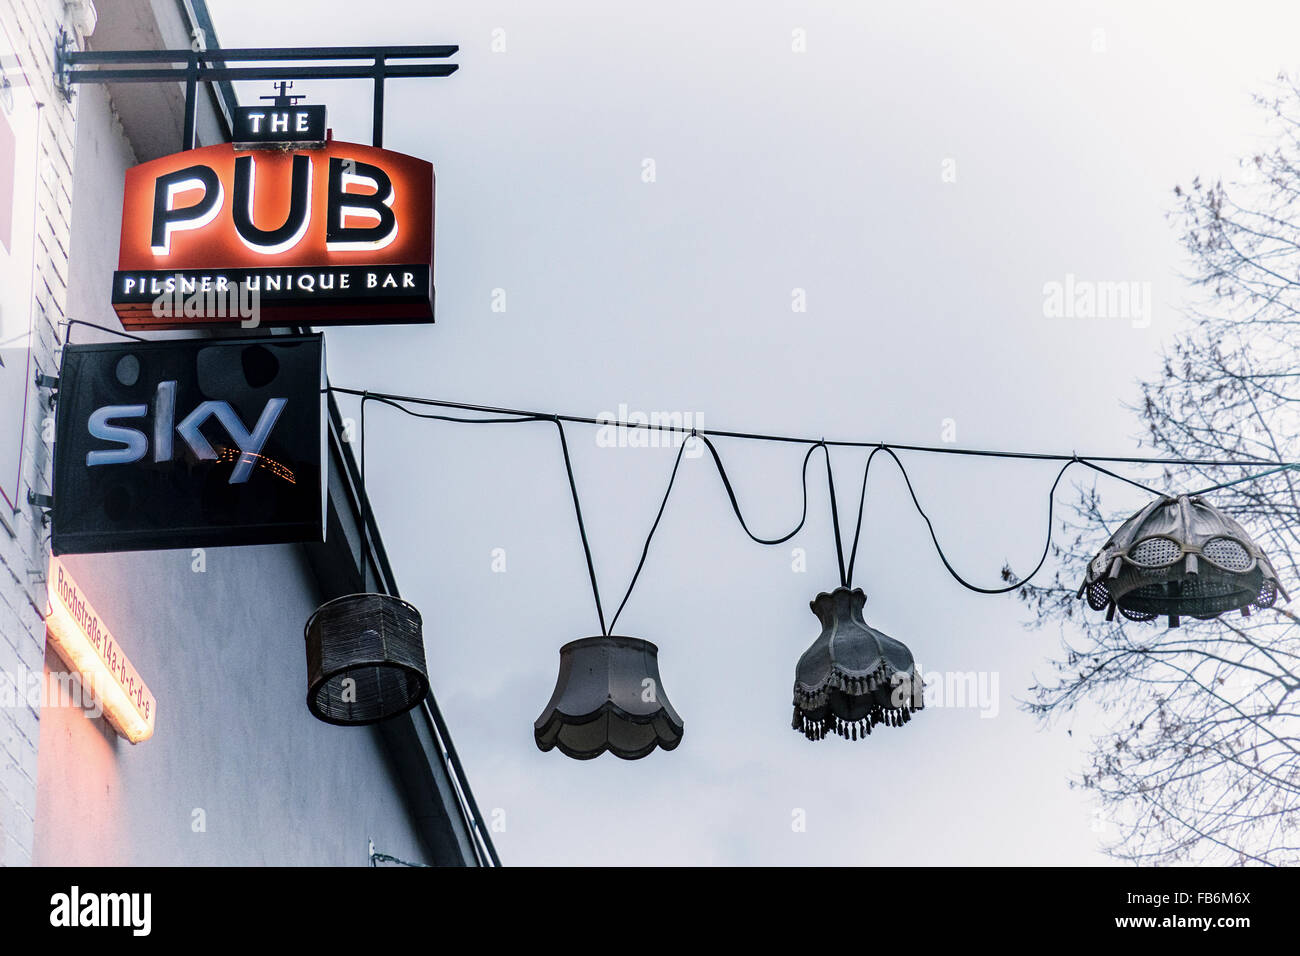 The Pub sign and quirky old lampshades, Berlin Stock Photo